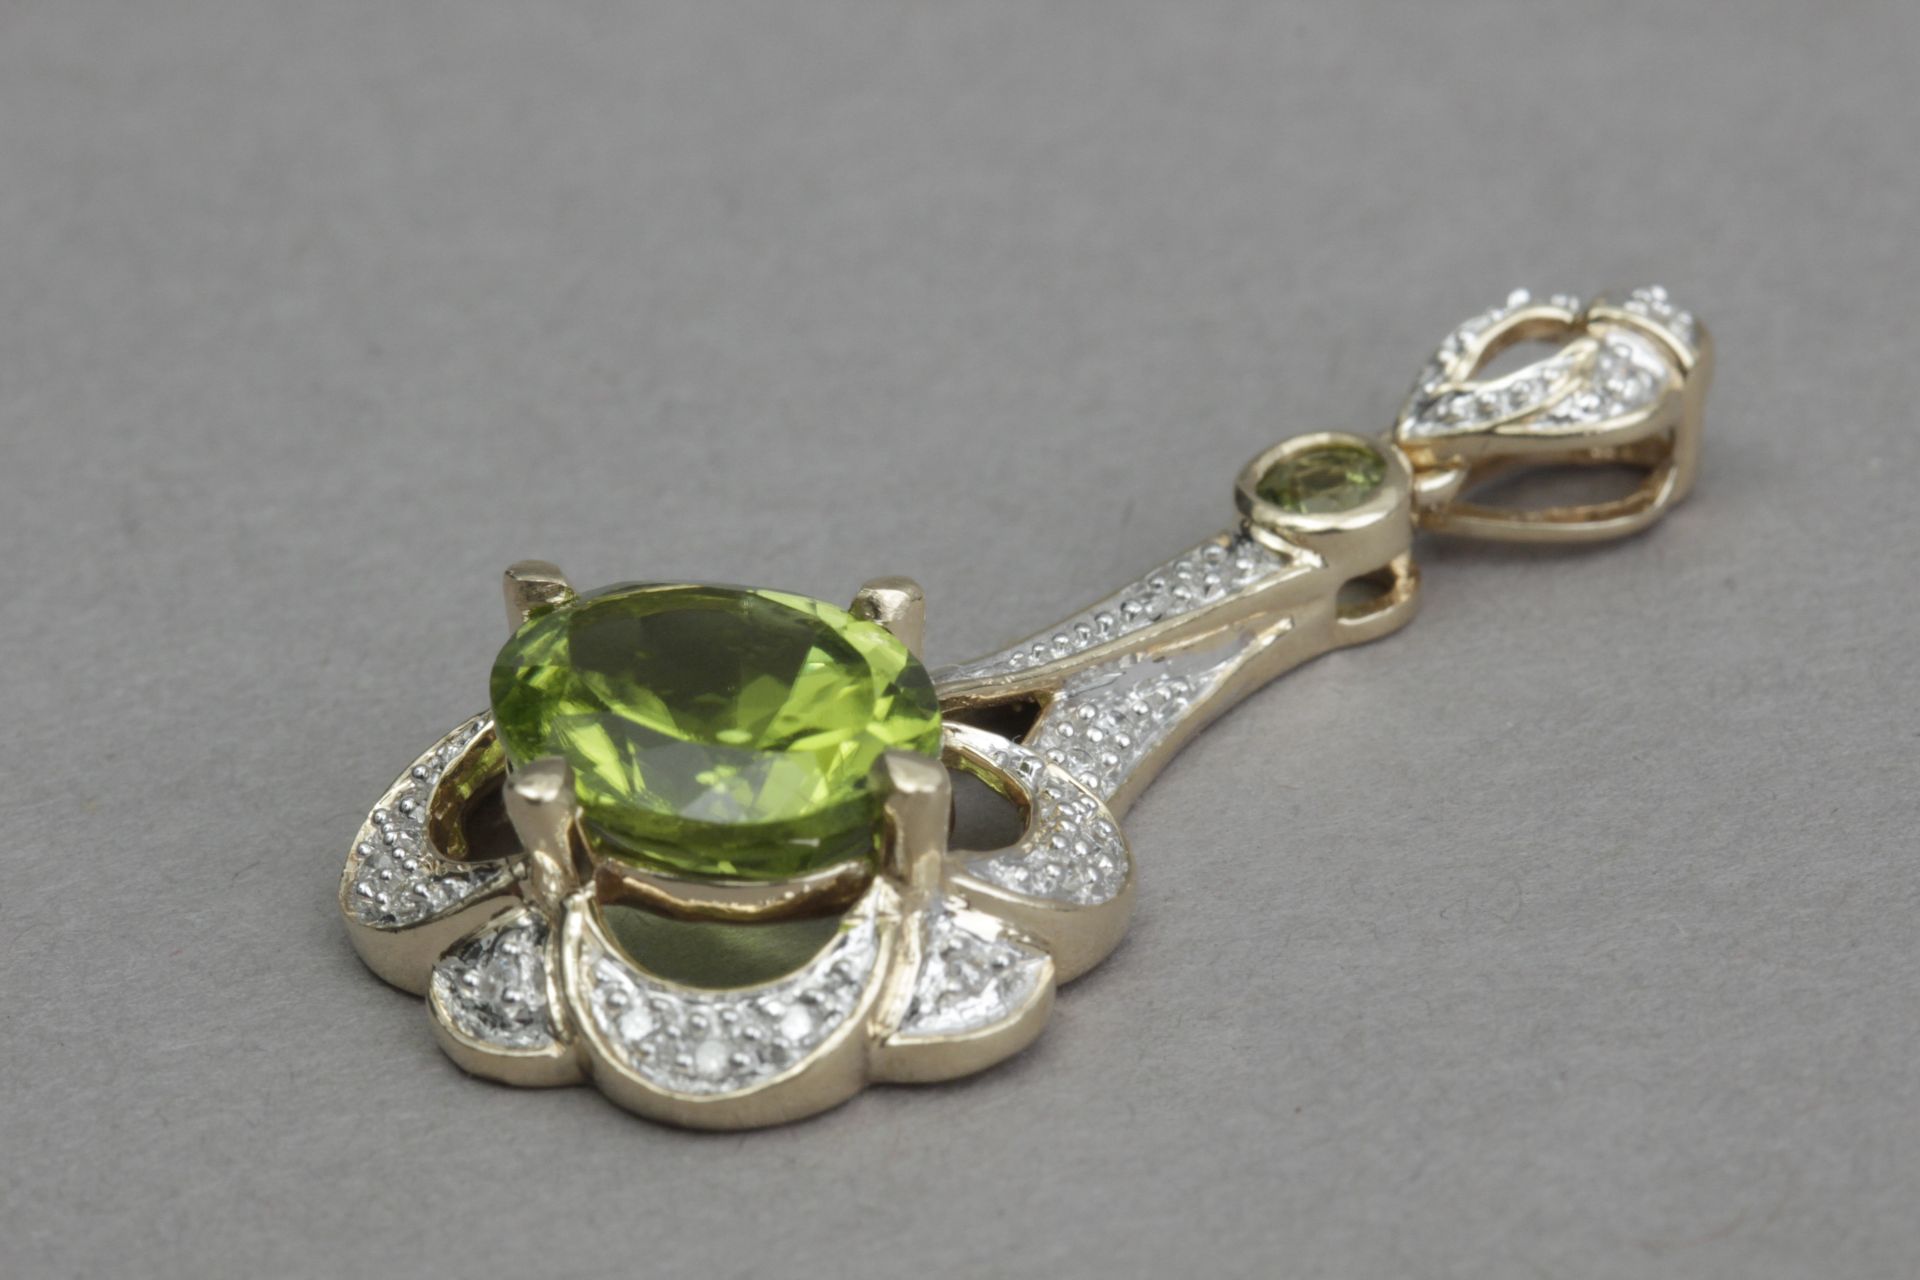 A diamond and diopside pendant in an 18k. yellow gold setting - Image 2 of 3